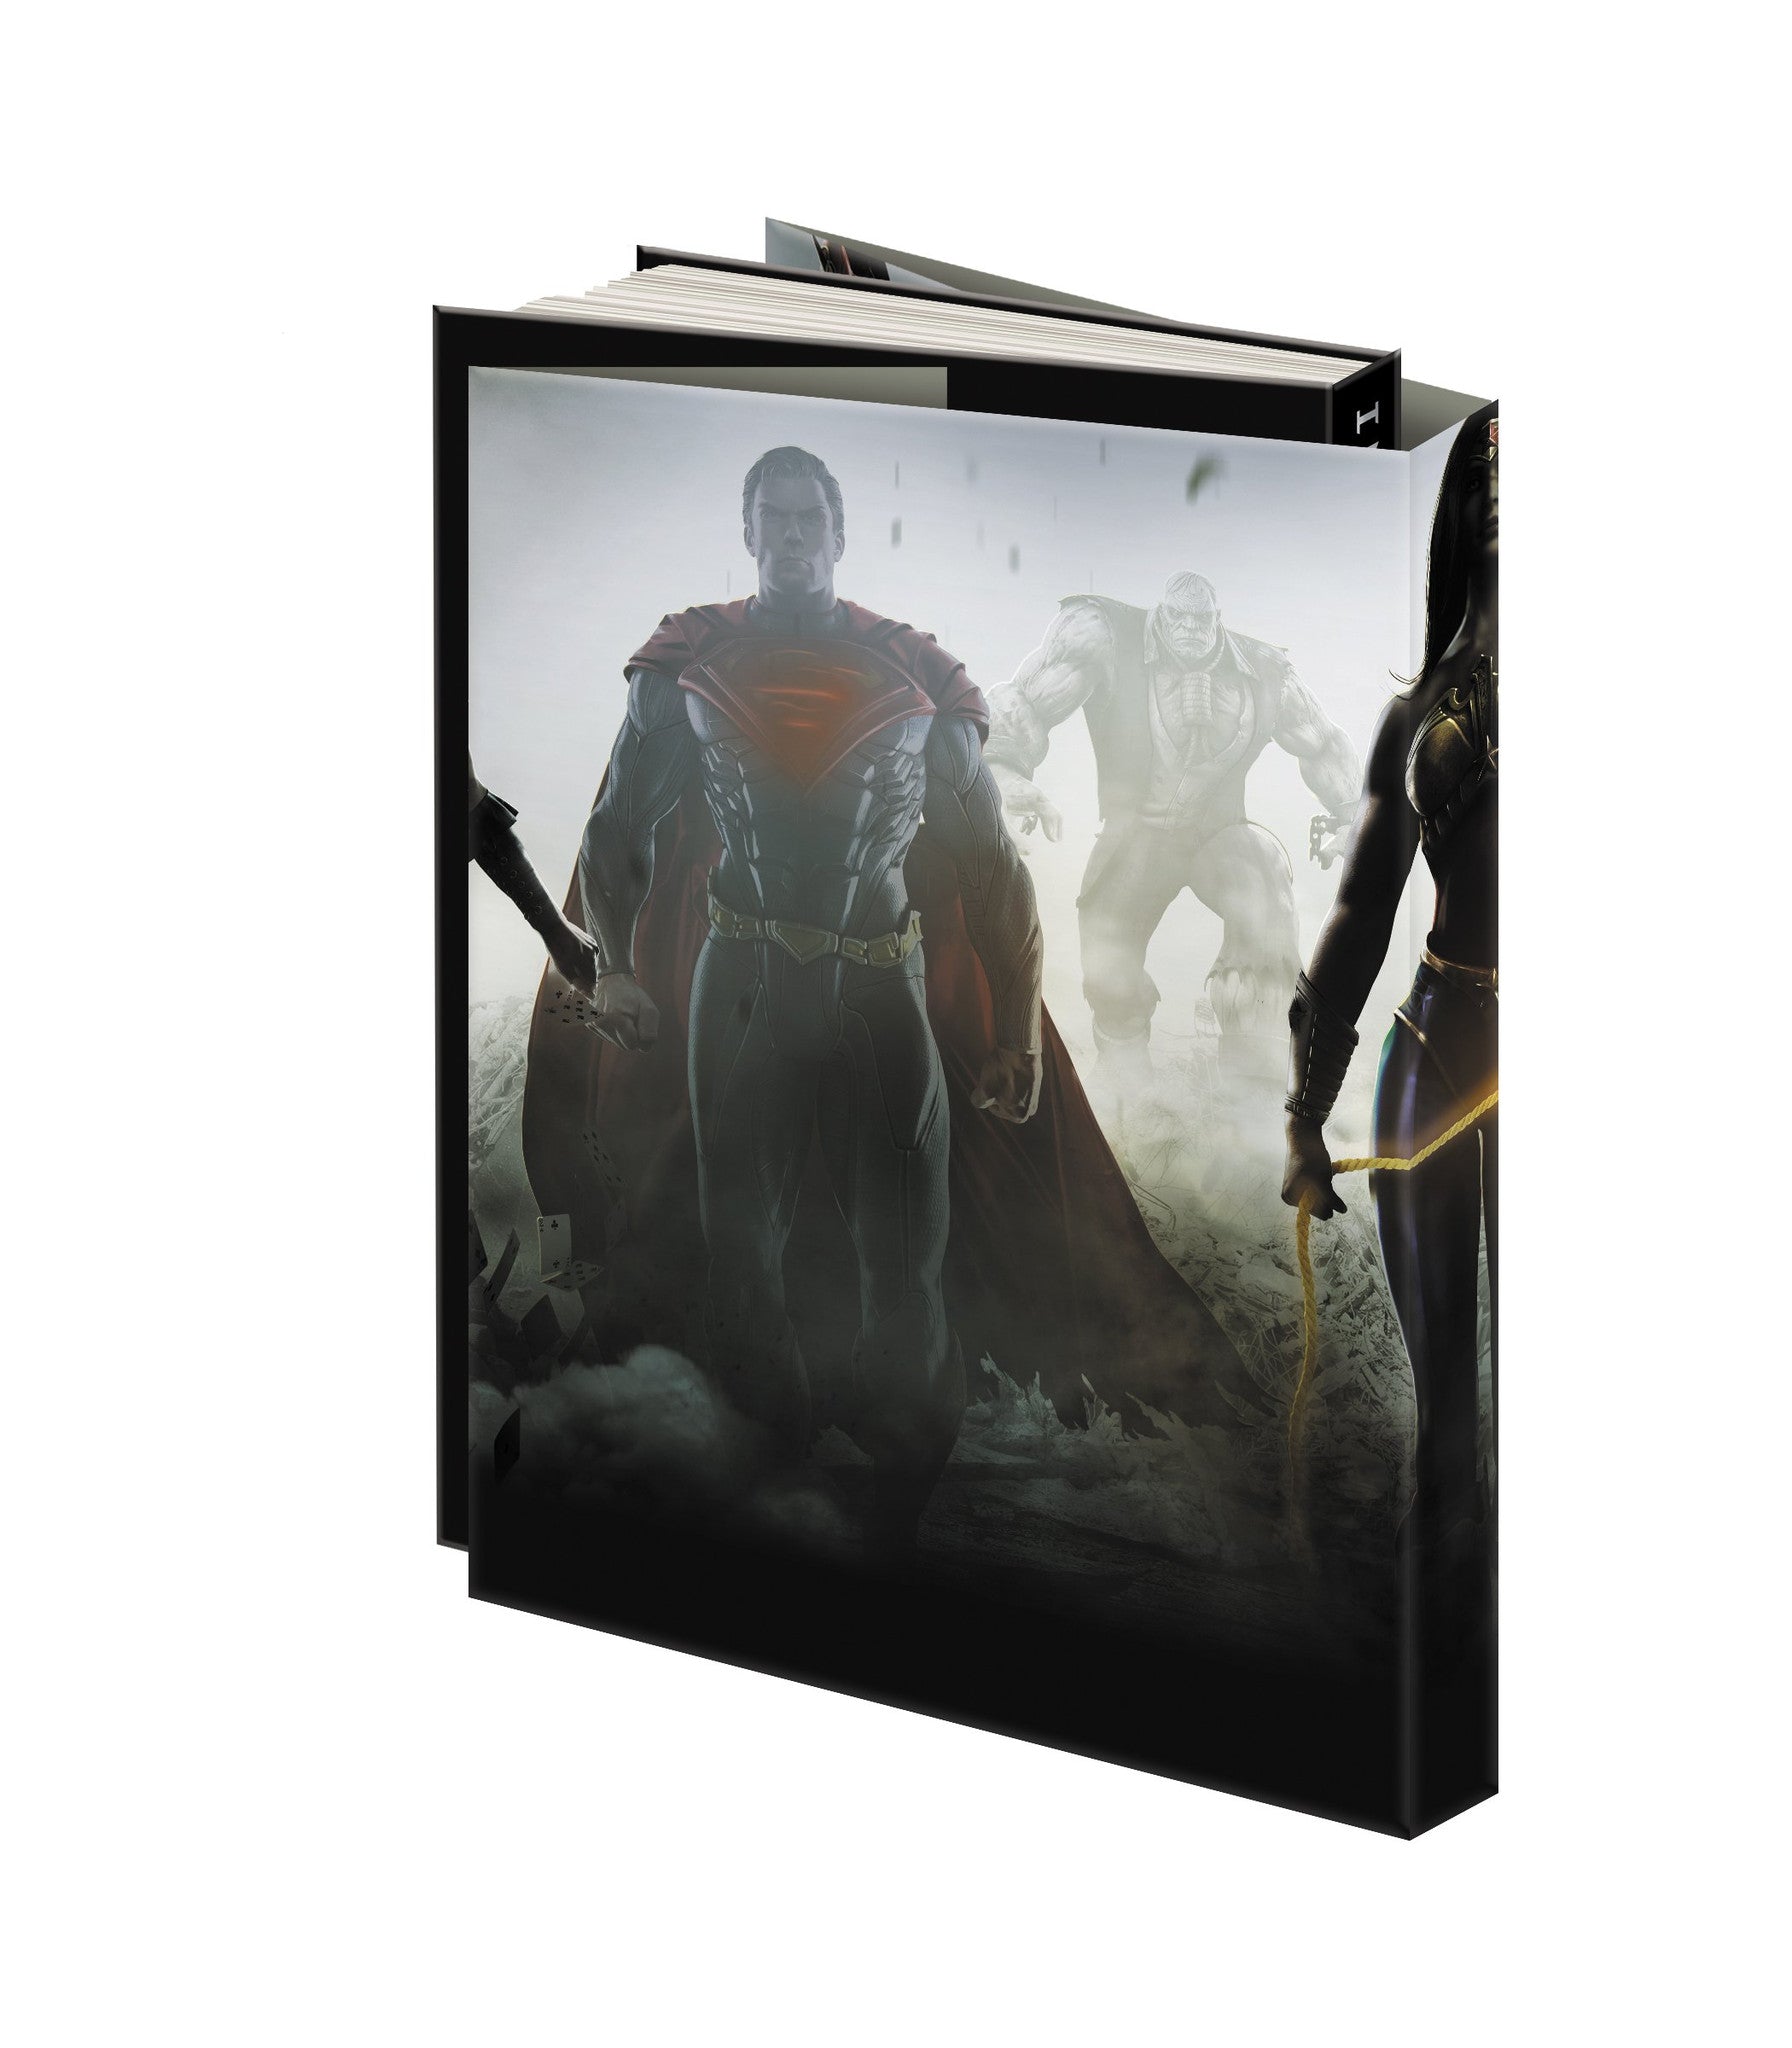 Injustice: Gods Among Us Collector's Edition: Prima Official Game Guide (Hardcover)